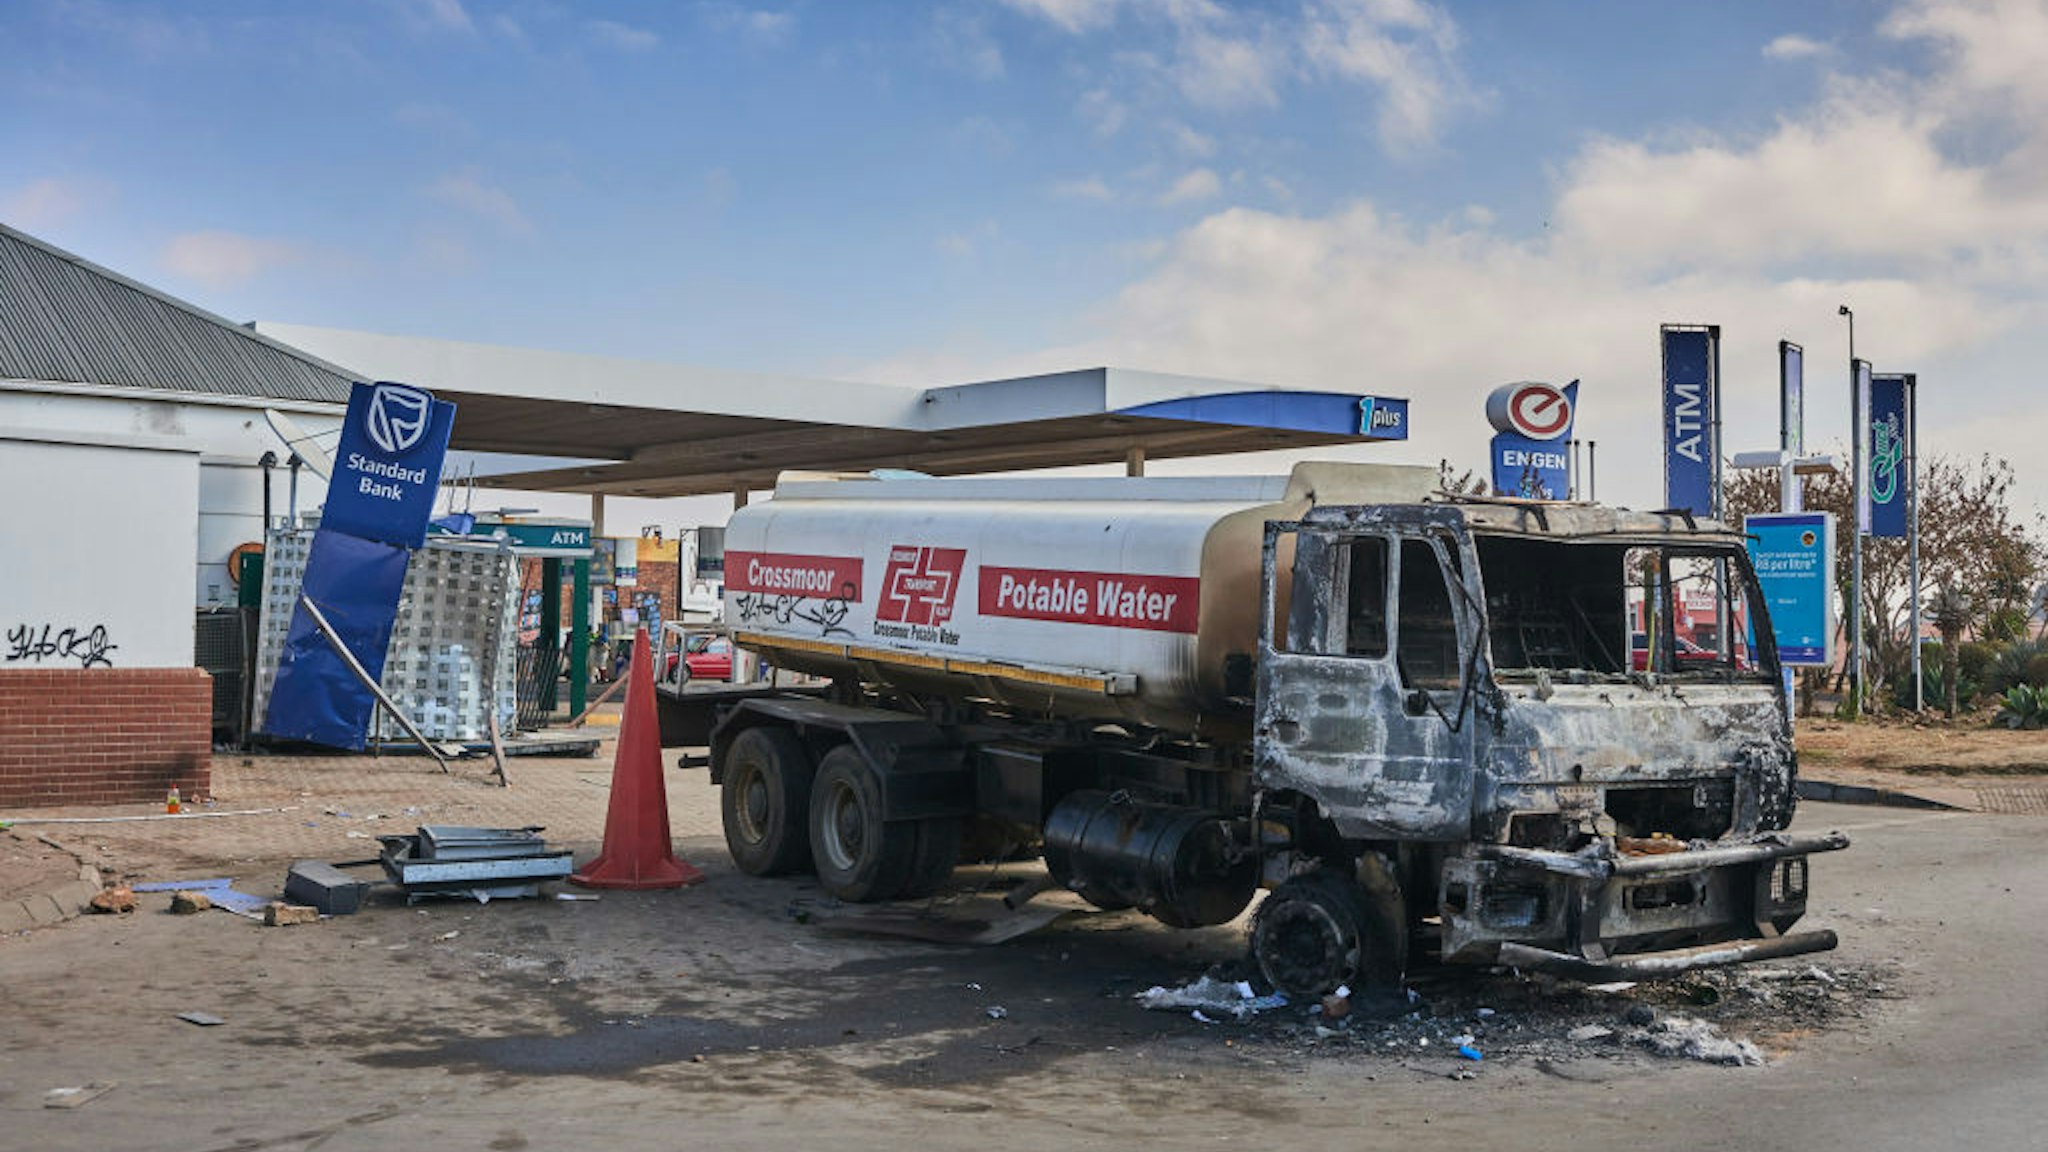 A burnt out water tanker by a damaged Engen Ltd. gas station following rioting in the Soweto district of Johannesburg, South Africa, on Thursday, July 15, 2021. Marauding mobs have ransacked hundreds of businesses and destroyed telecommunications towers and other infrastructure, while transport networks and a program to vaccinate people against the coronavirus have been disrupted. Photographer: Waldo Swiegers/Bloomberg via Getty Images